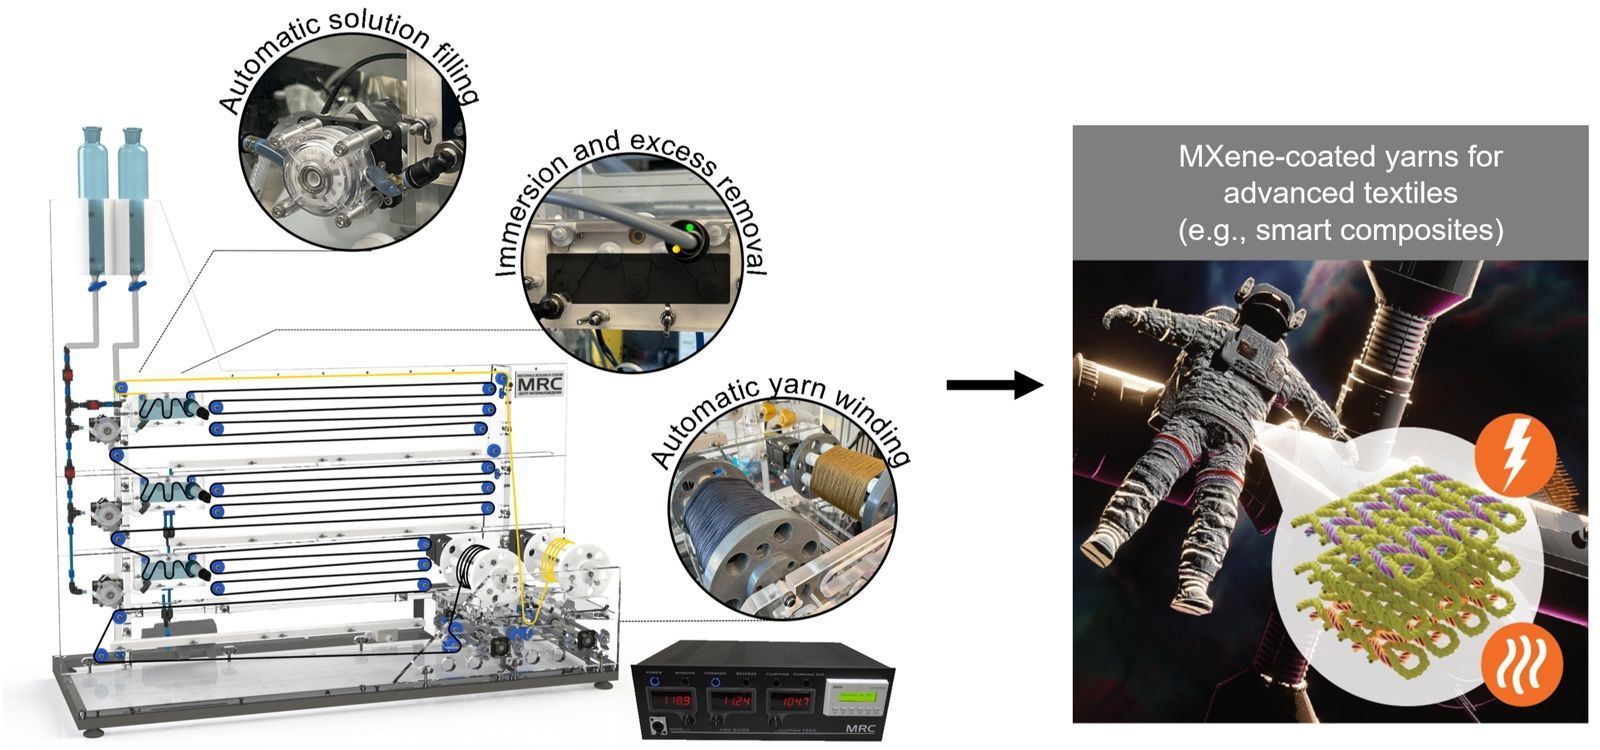 Read recently published paper about our collaborative work: MXene Functionalized Kevlar Yarn via Automated, Continuous Dip Coating